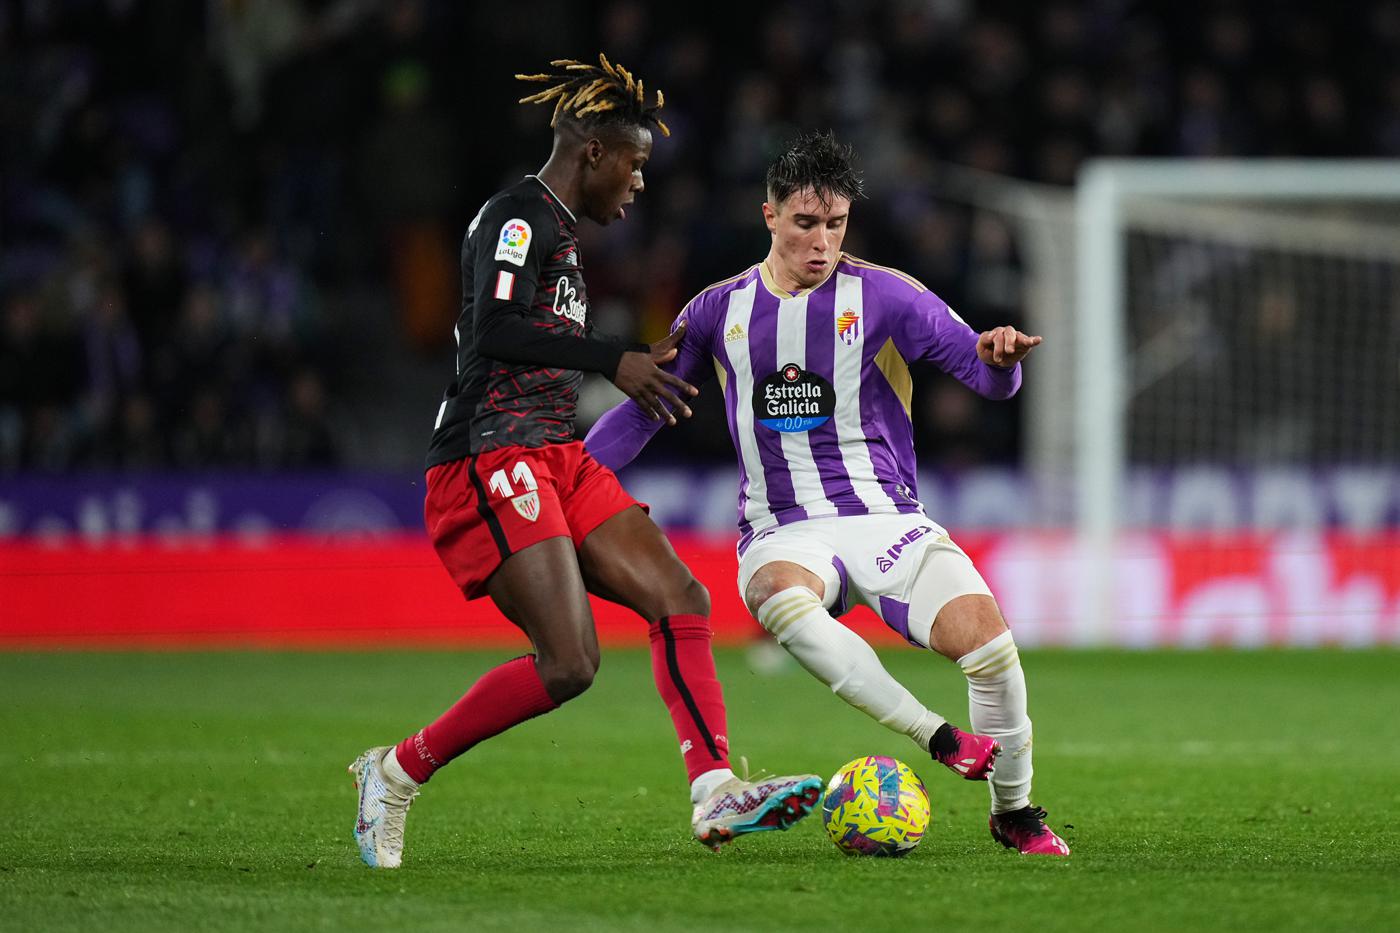 Valladolid - Athletic - 1:3. Spain Championship, 26th round. Match review, statistics